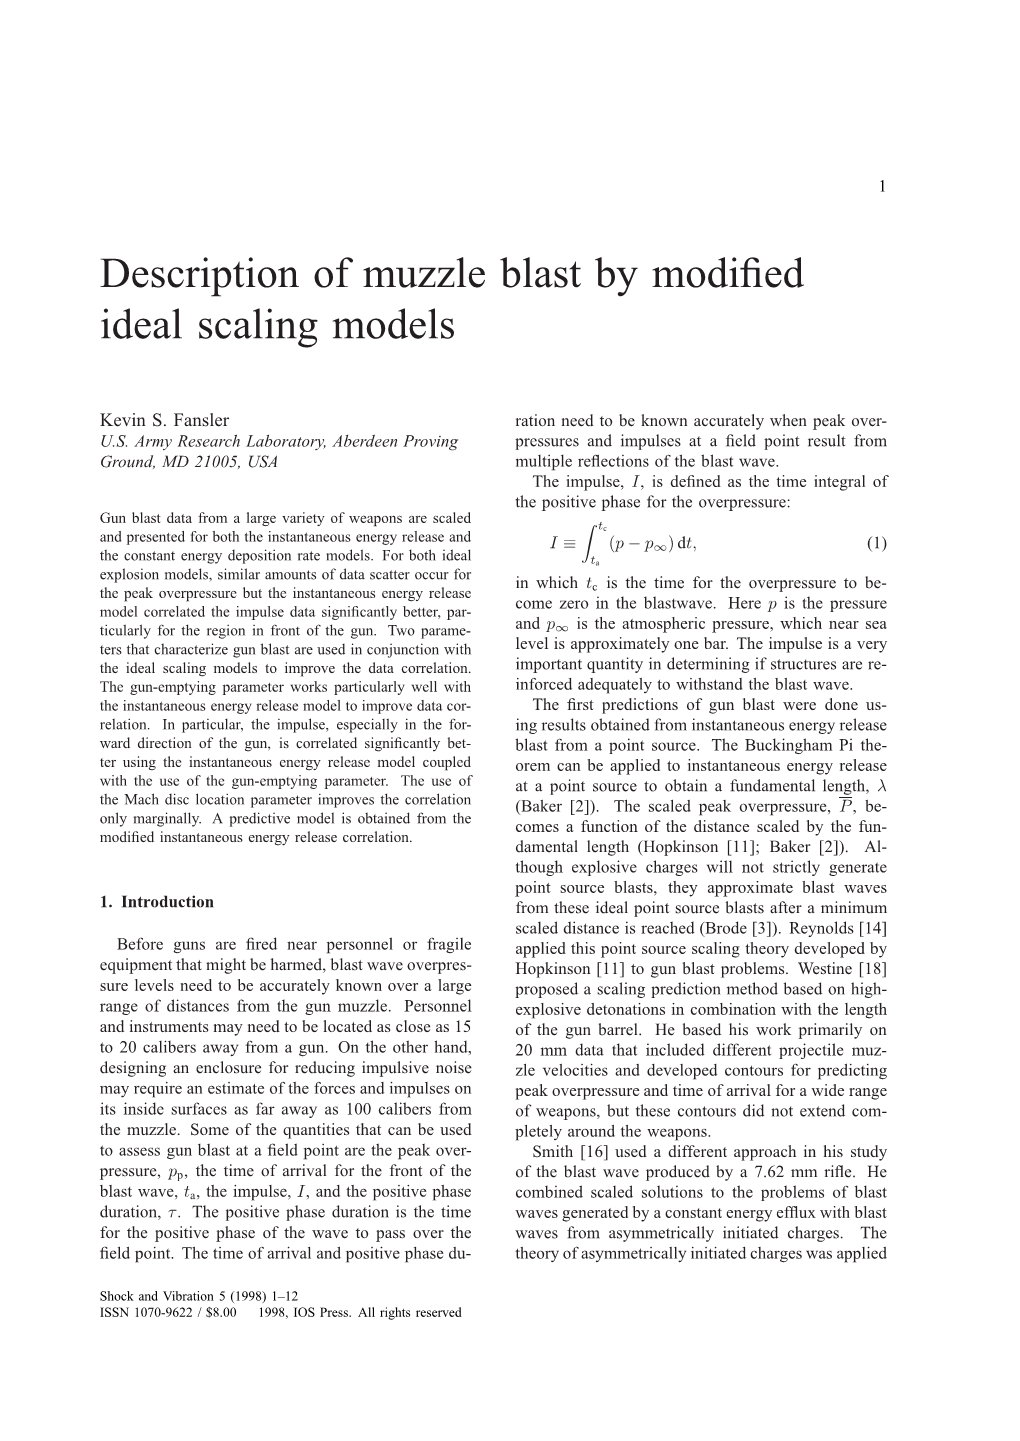 Description of Muzzle Blast by Modified Ideal Scaling Models